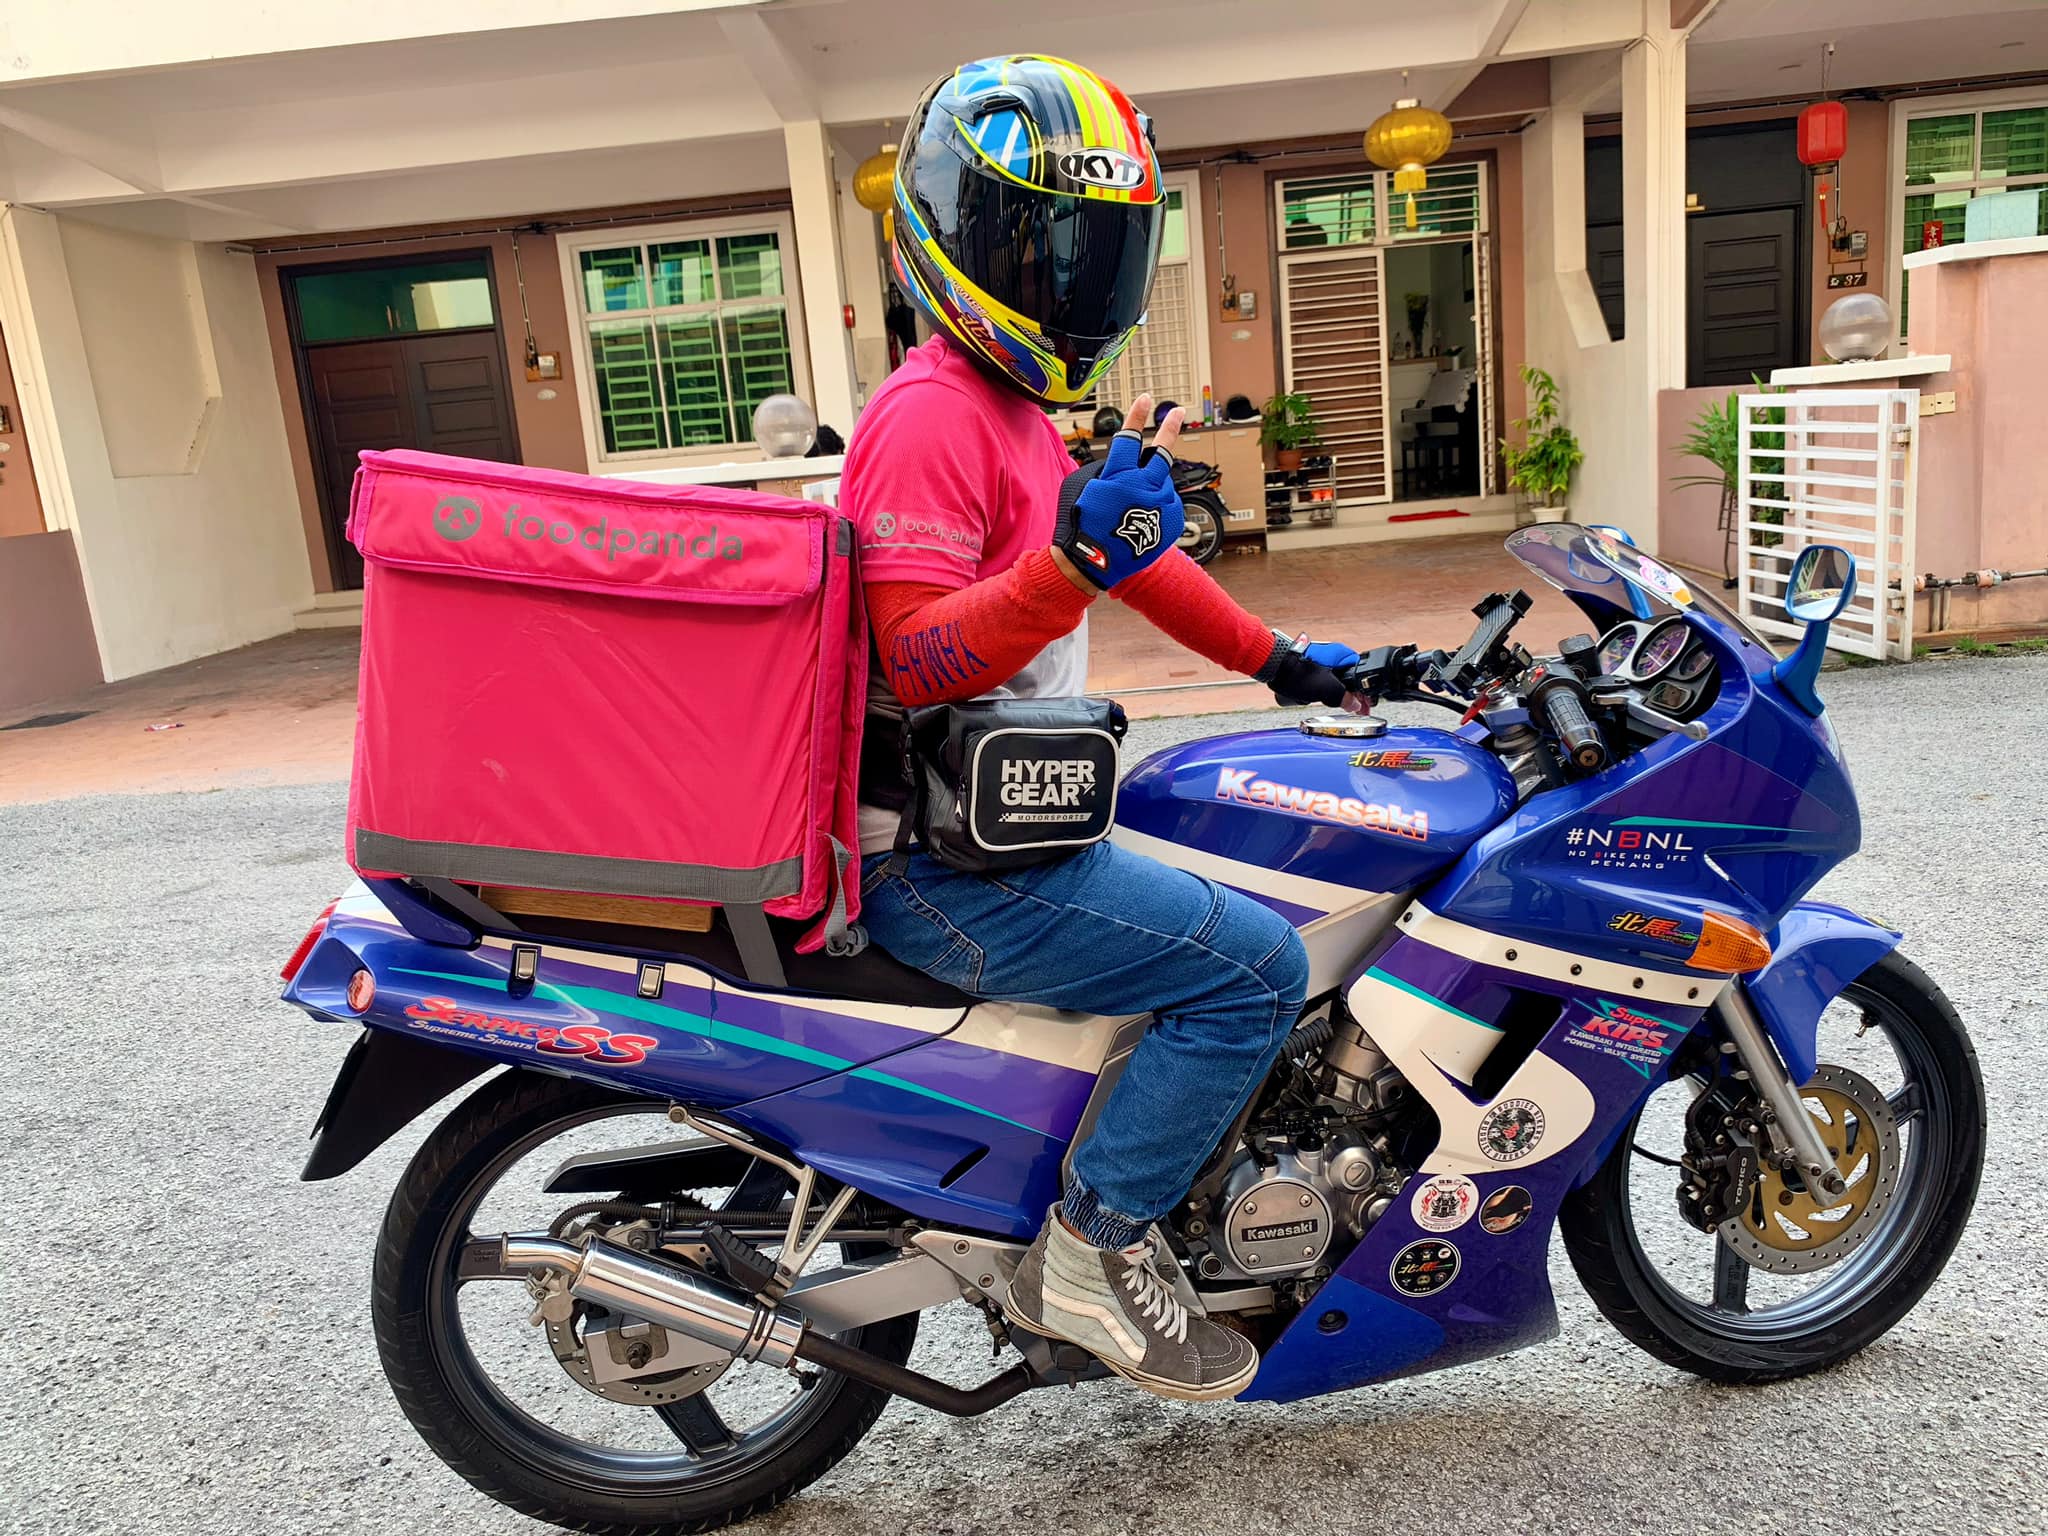 Foodpanda riders' thoughts on the rm18k income: “you don't know how hard it is... ”